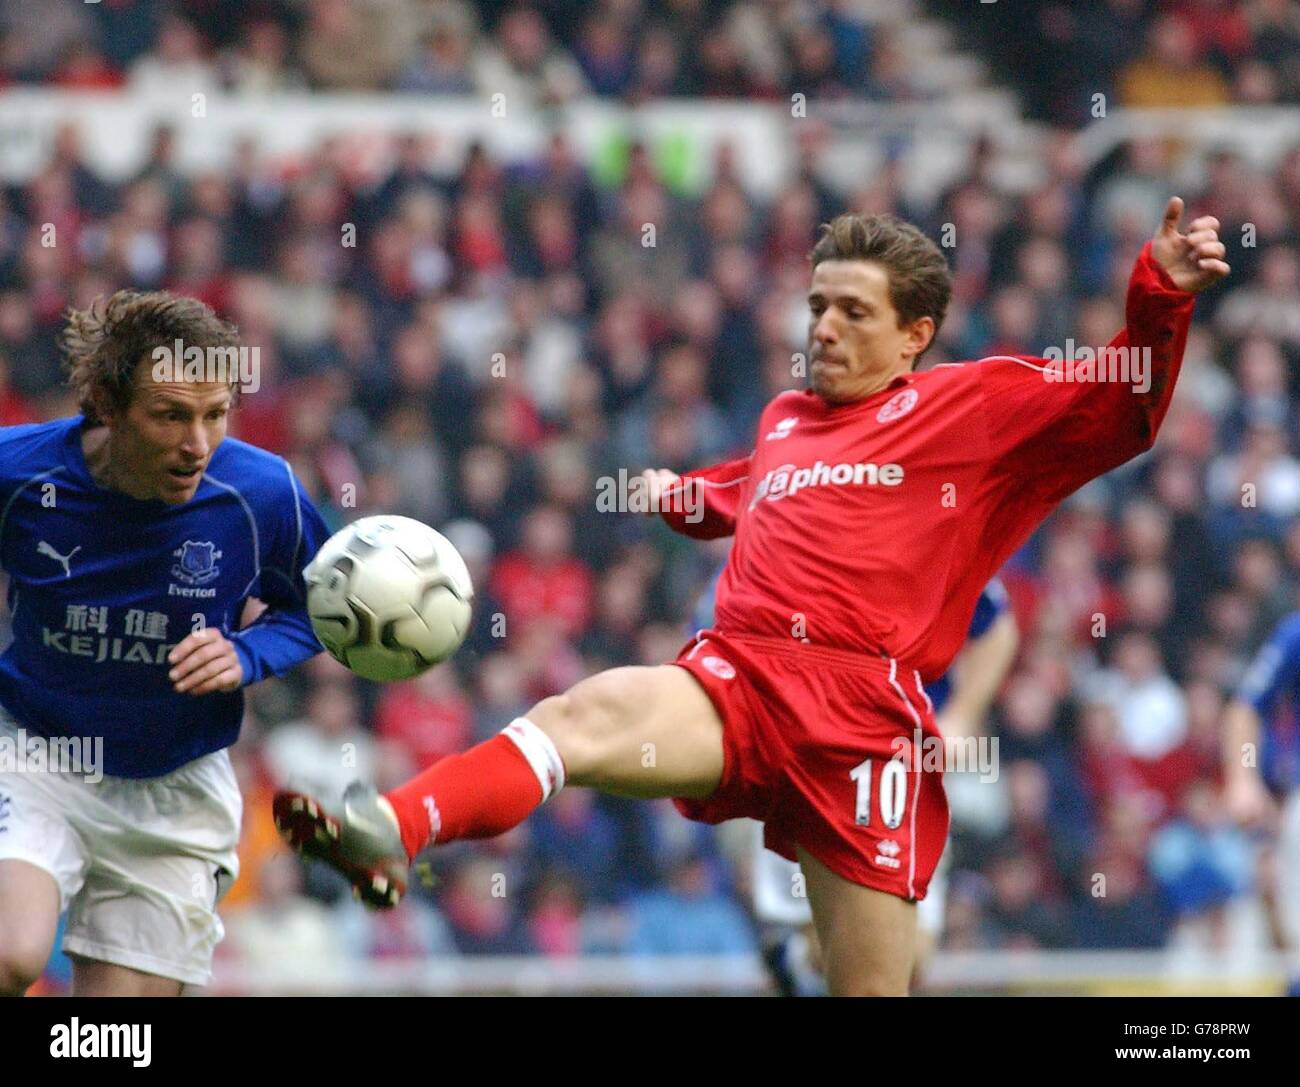 Juninho challenges Everton's Alan Stubbs during the FA Barclaycard Premiership match at the Riverside Stadium, Middlesbrough. Stock Photo